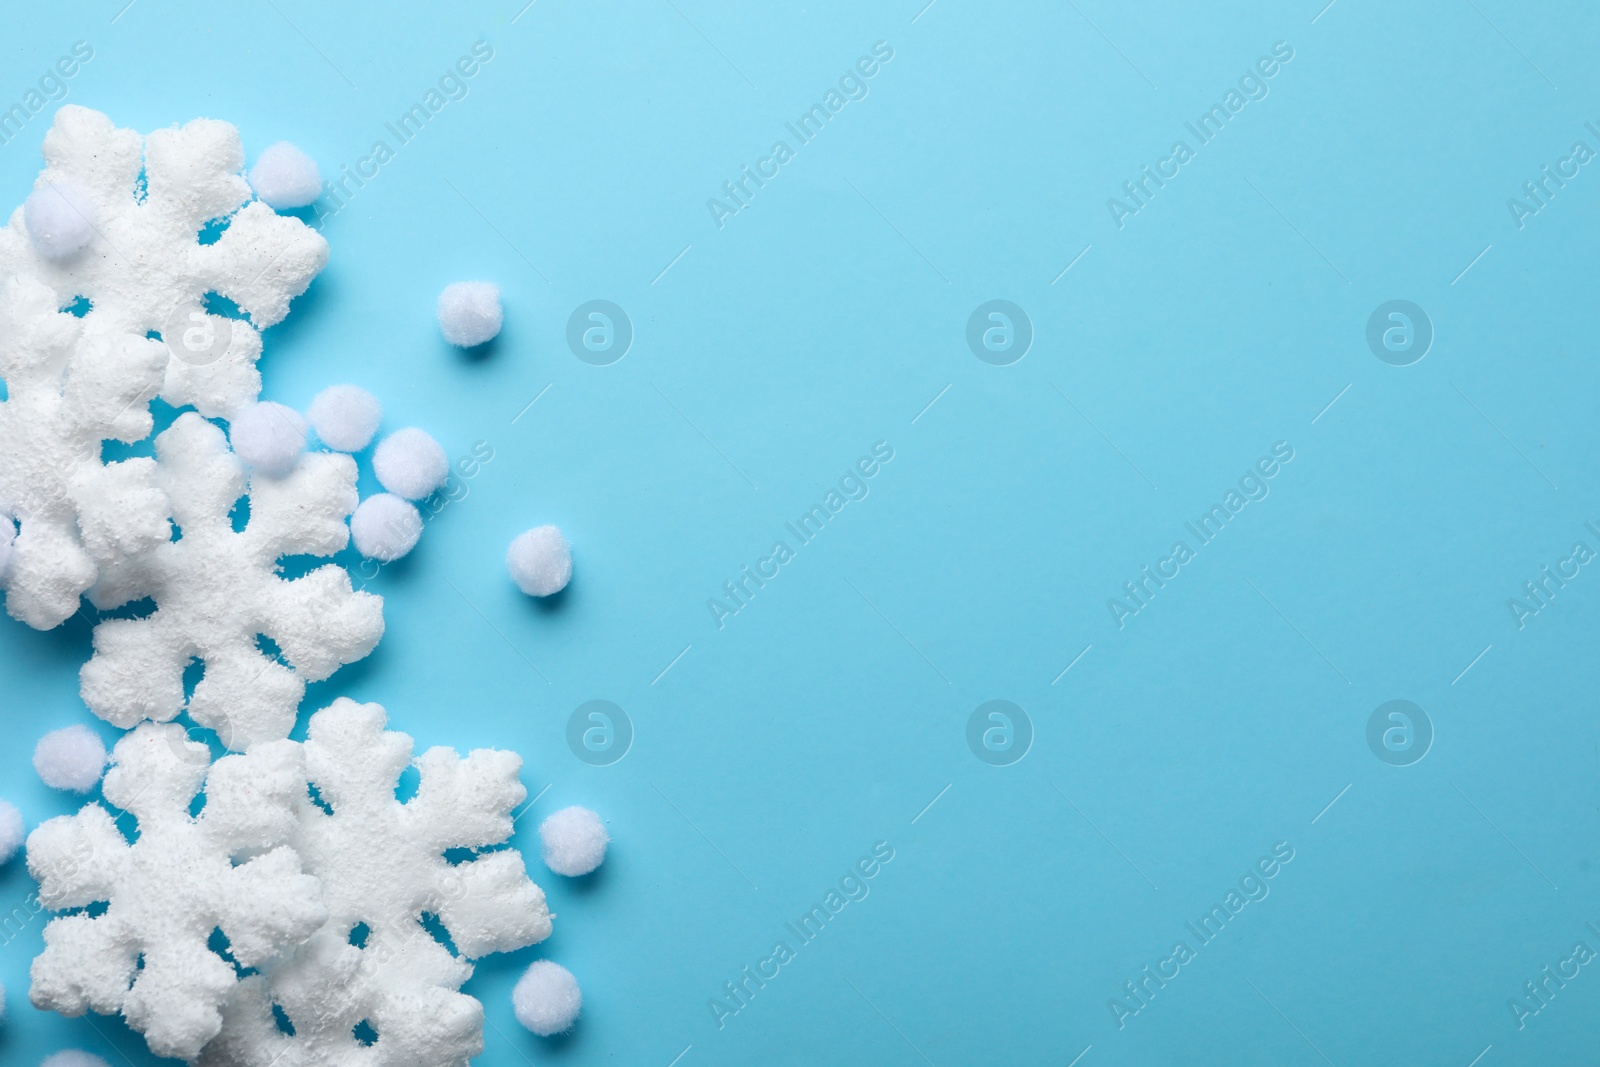 Photo of Beautiful snowflakes and decorative balls on light blue background, flat lay. Space for text